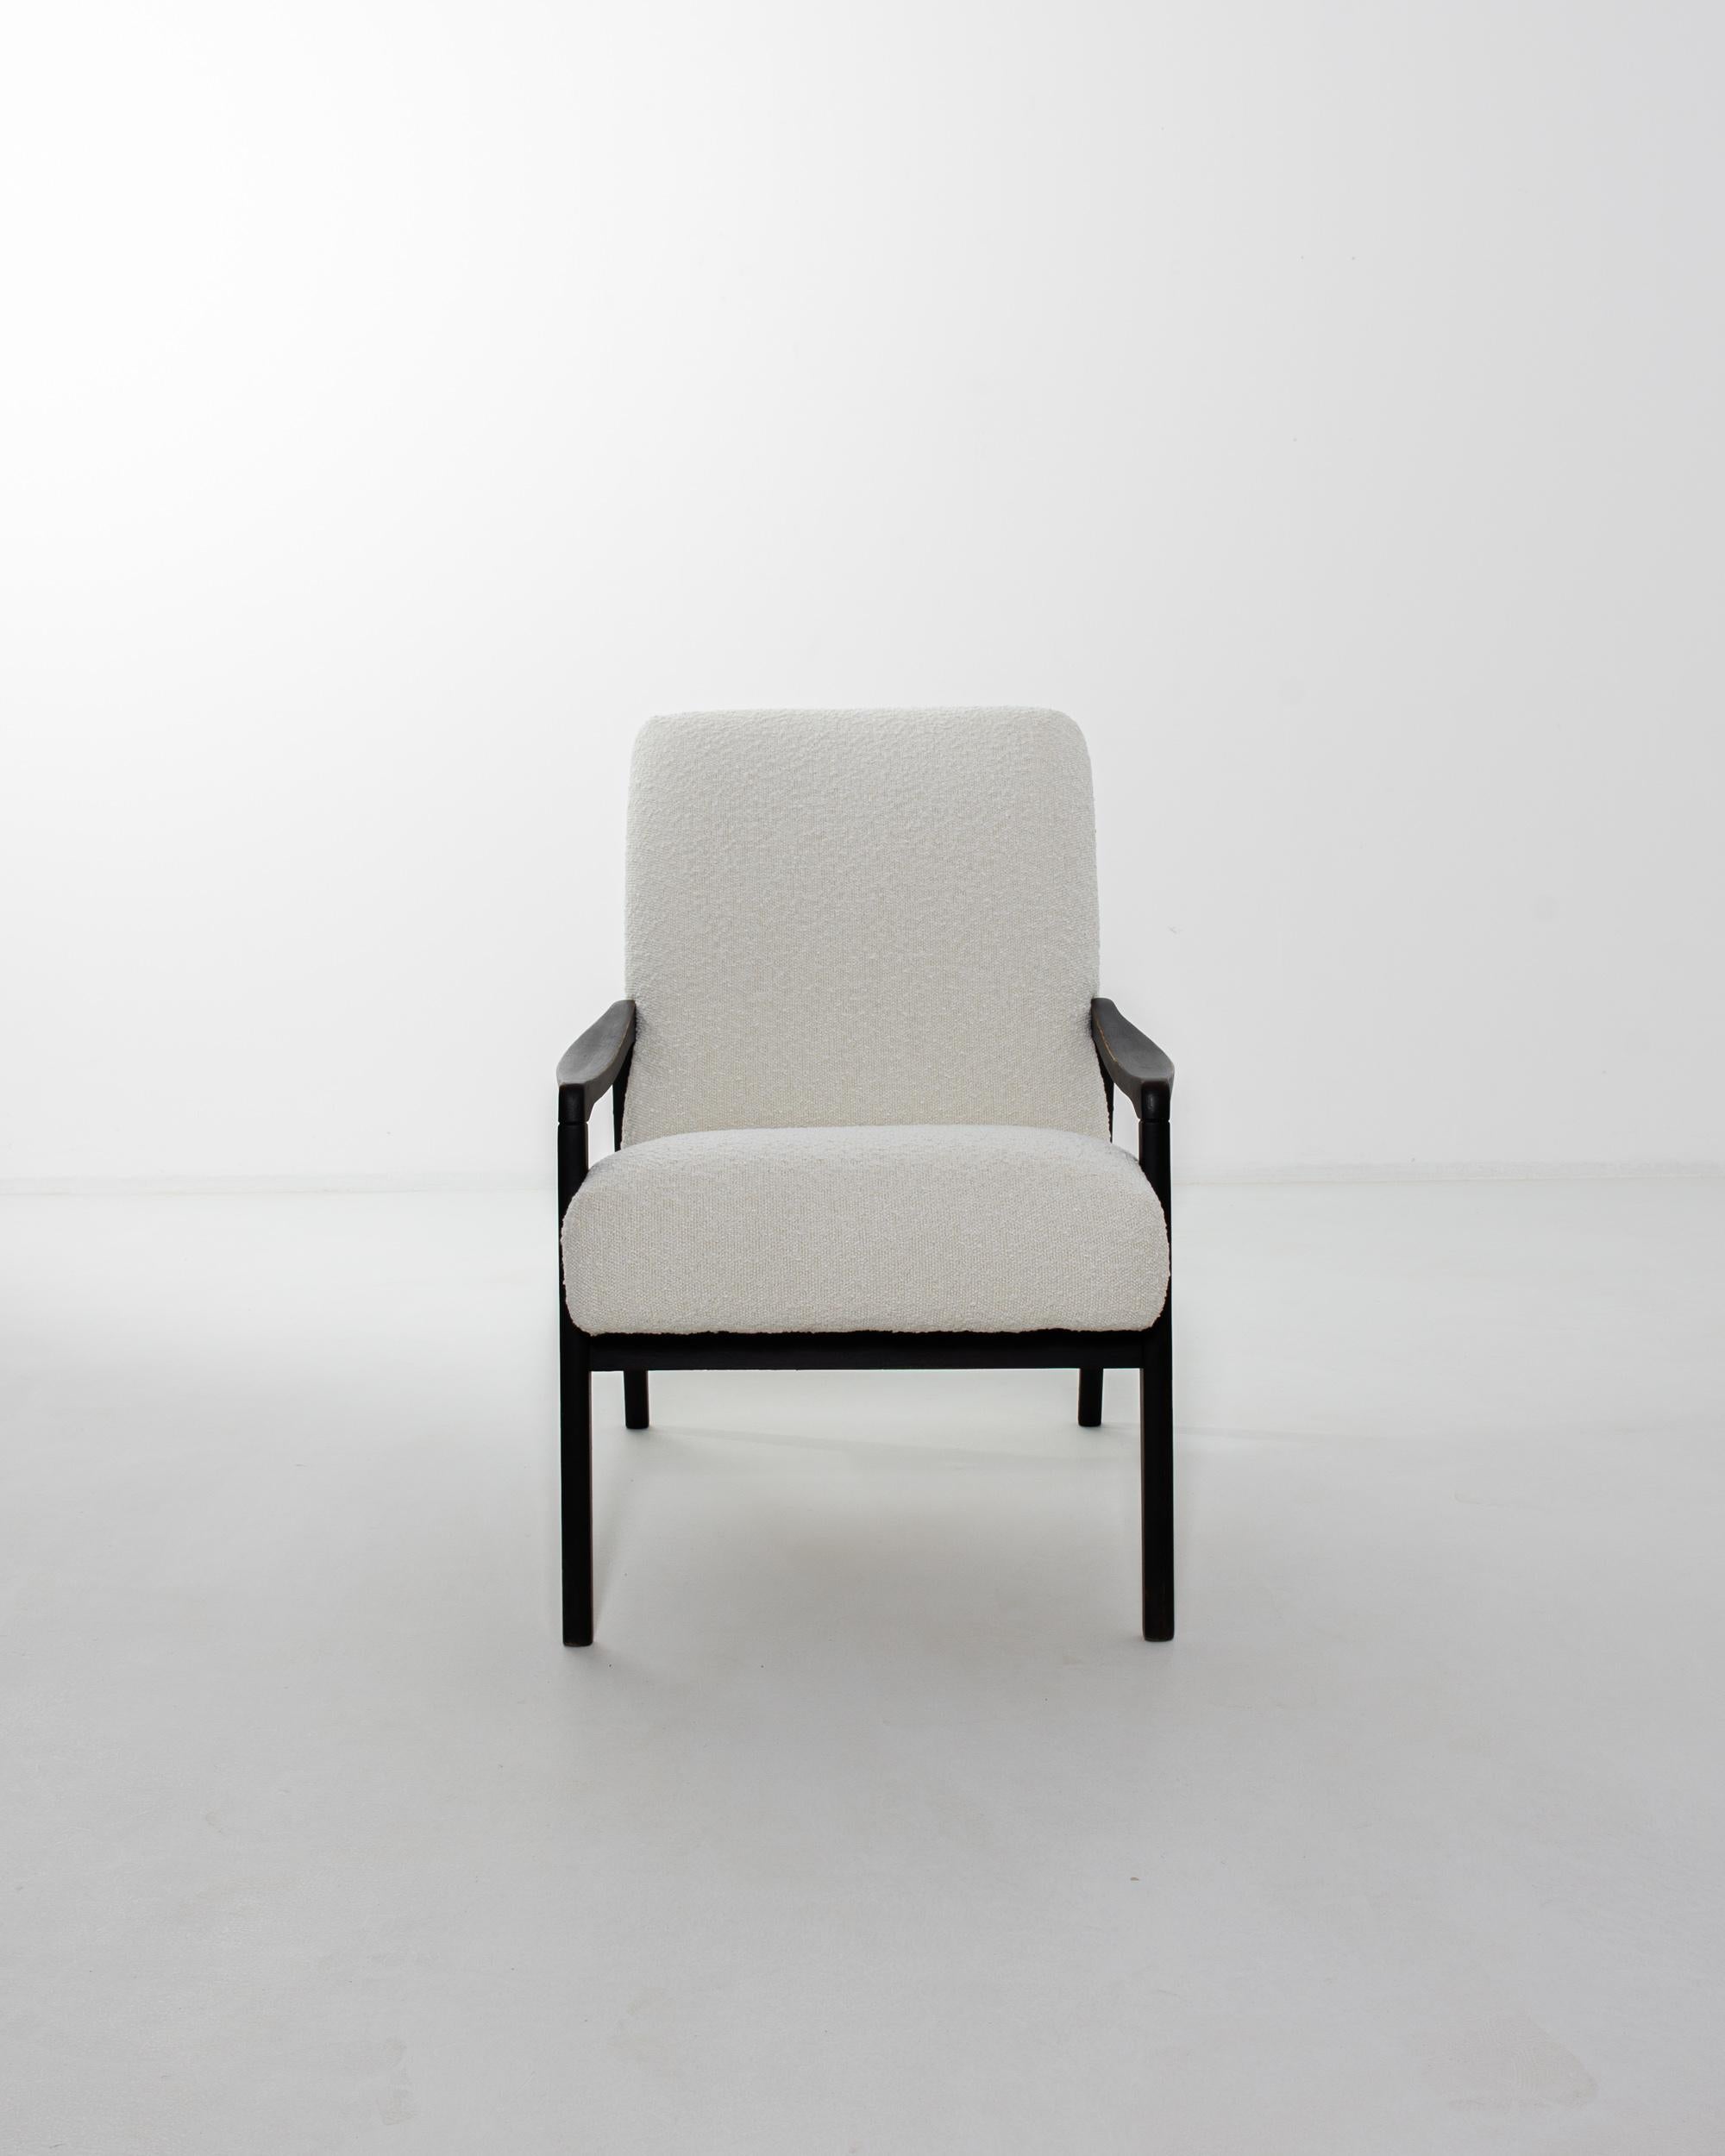 A wooden armchair produced in the former Czechoslovakia, with the design attributed to Jiri Jiroutek. This 1960s design is re-upholstered in updated ivory boucle upholstery; the airy tone was chosen to compliment the rich black of the hardwood